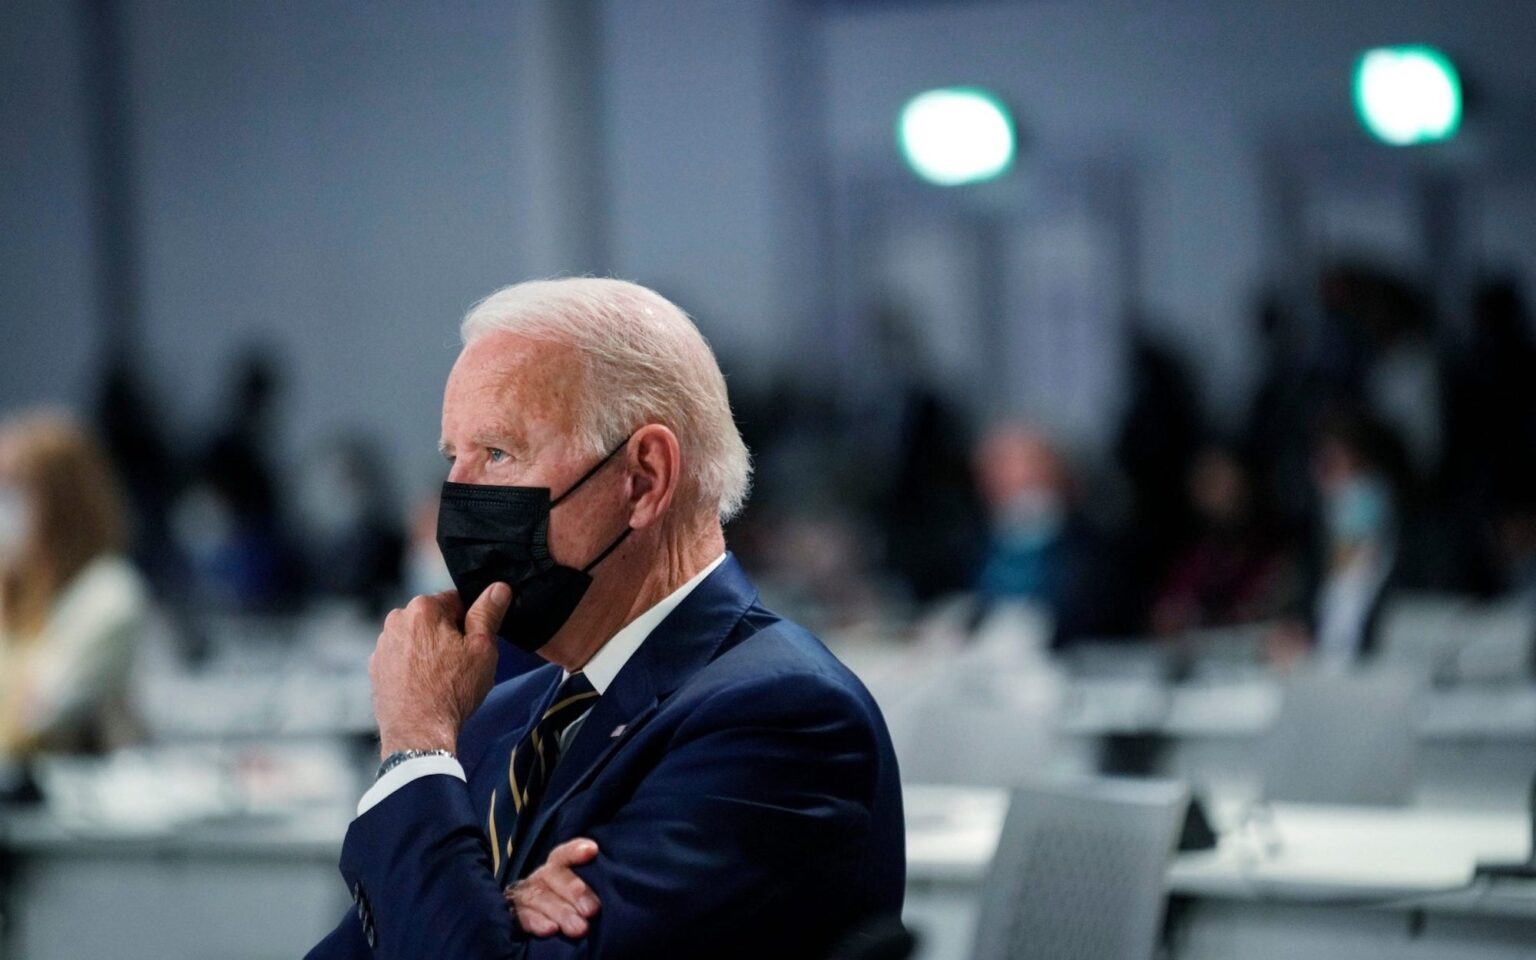 At the critical UN Climate Change Convention, Joe Biden fell asleep during a speech on environmental reform. Does this news prove he's too old for office?